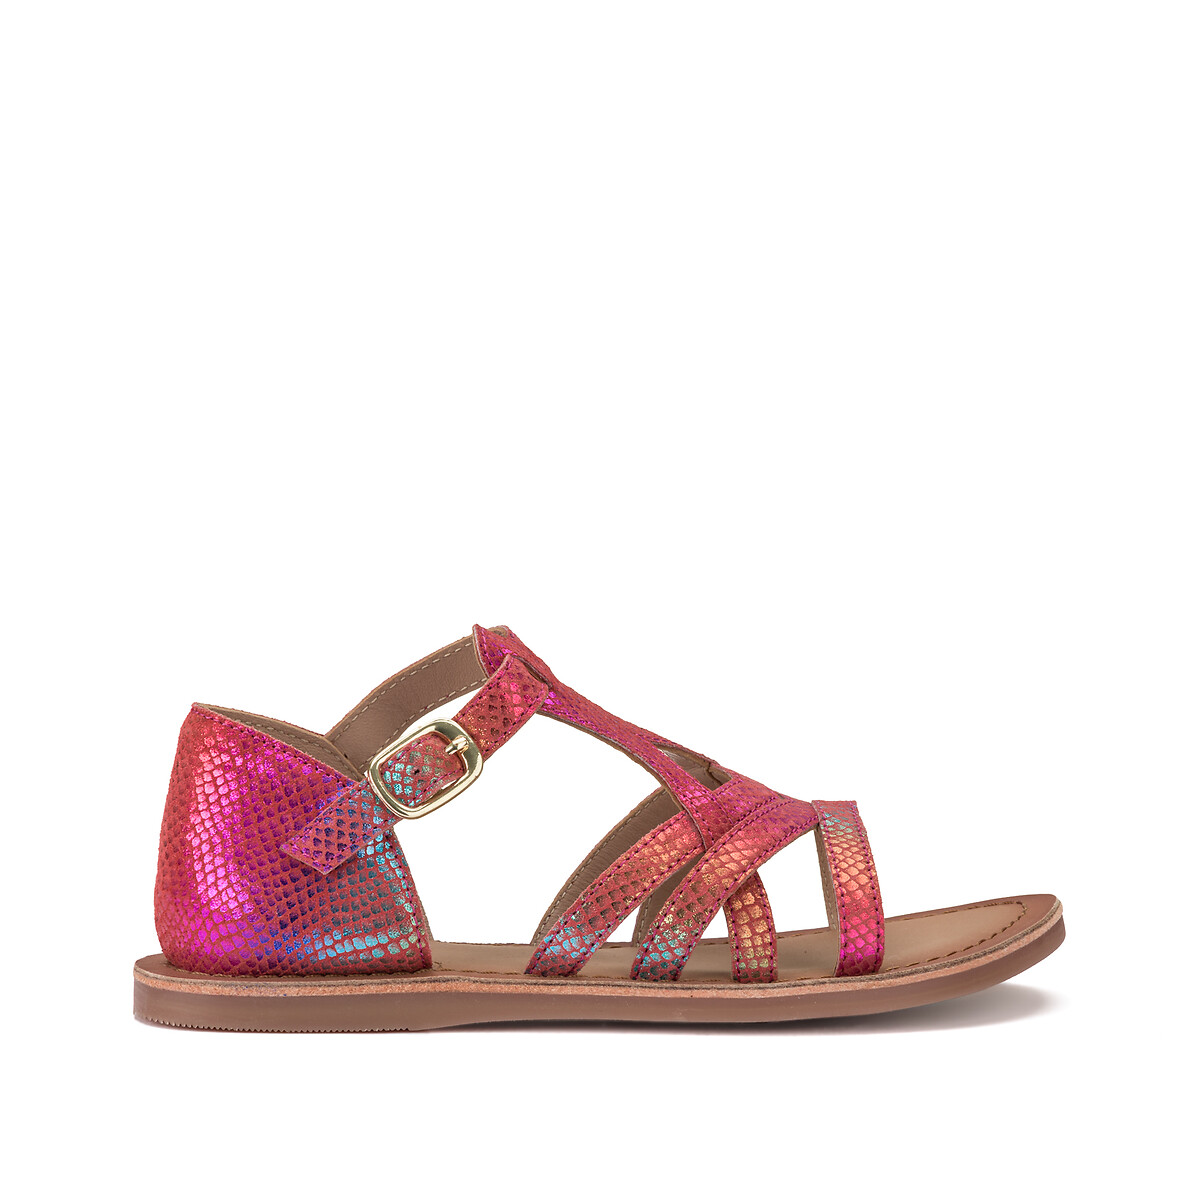 Kids leather flat sandals pink La Redoute Collections | La Redoute